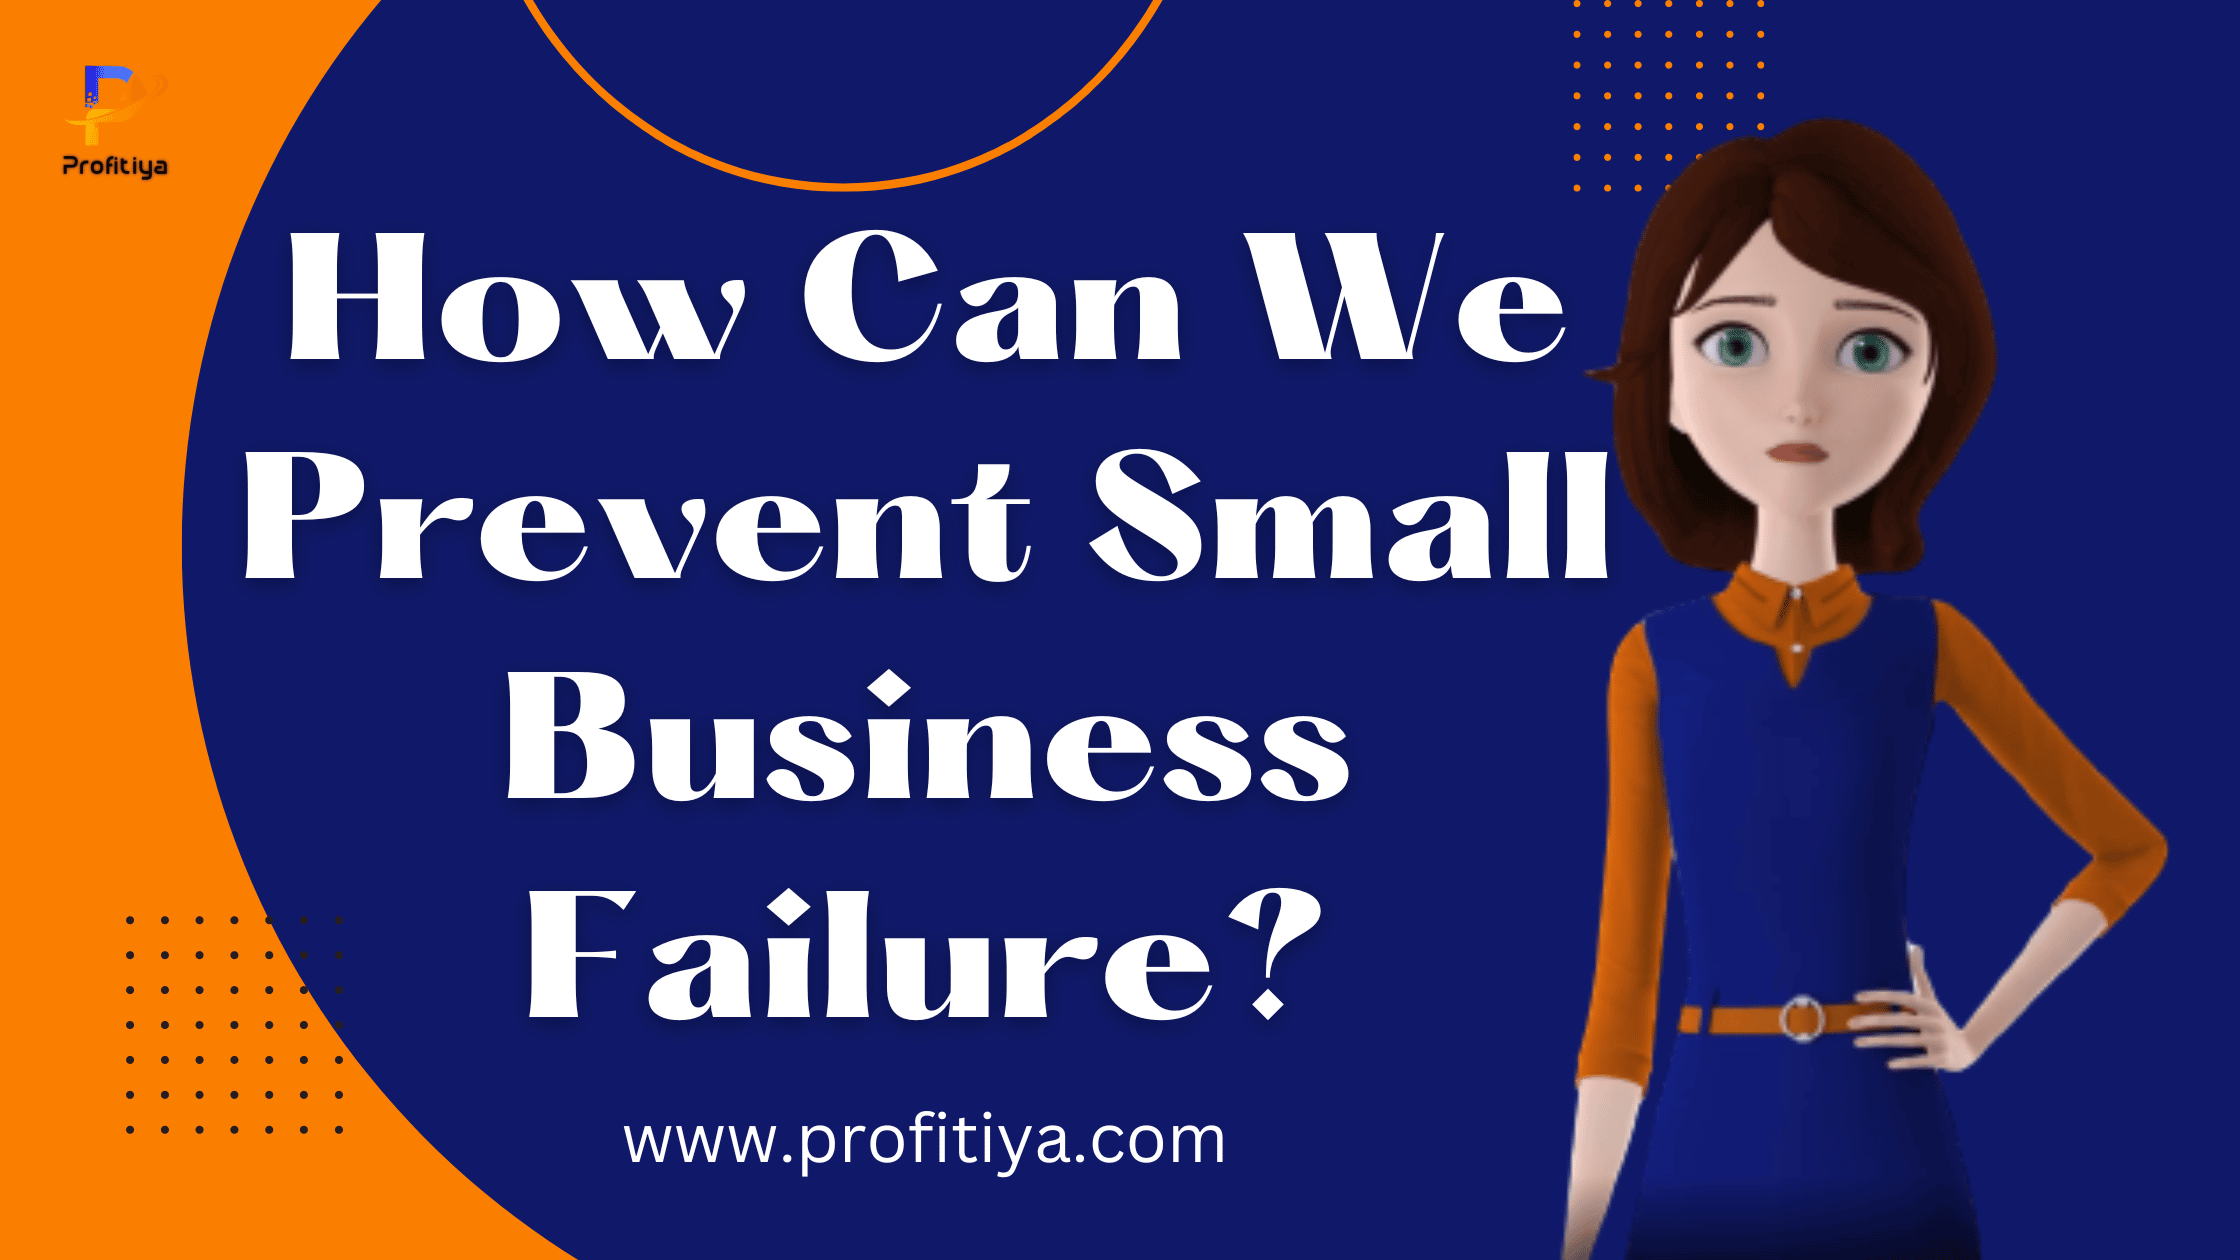 How Can We Prevent Small Business Failure?